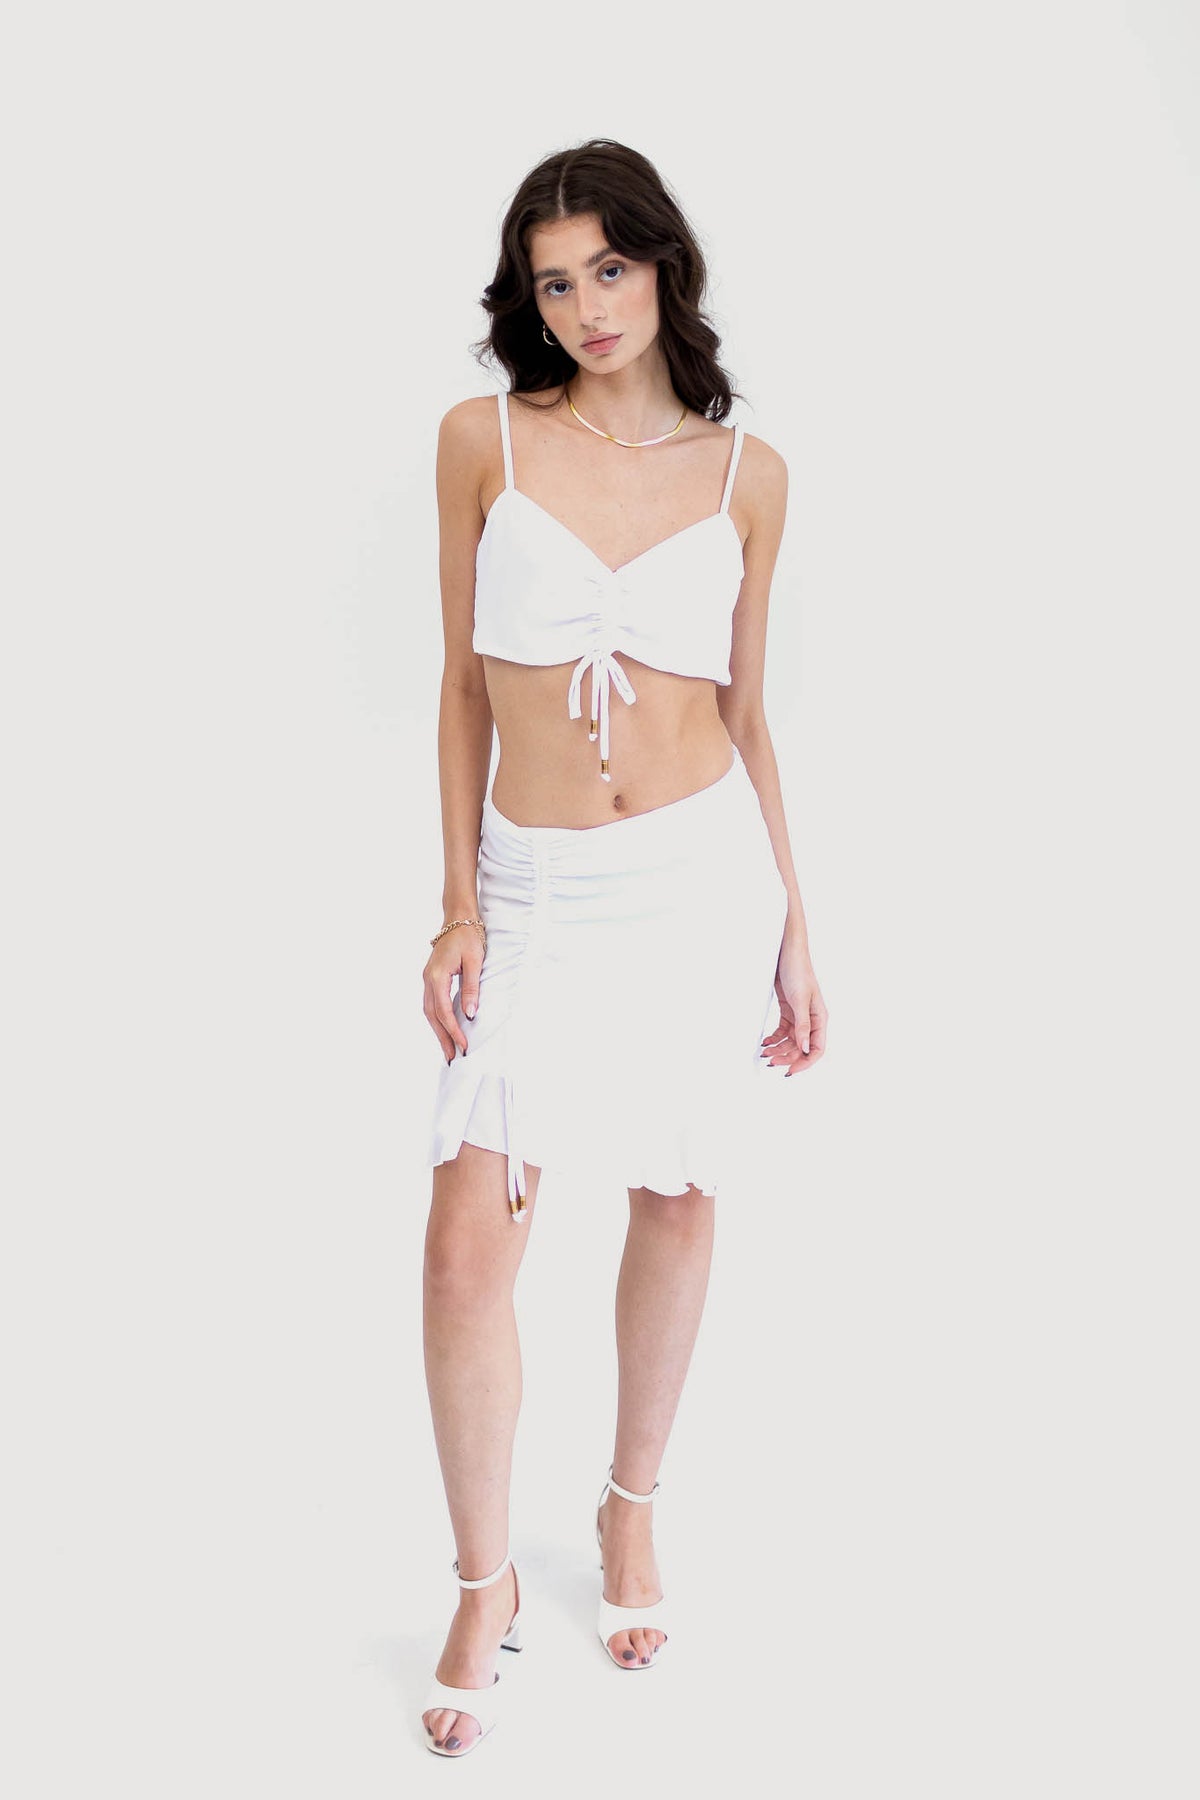 Model wearing a floral ruched crop top with adjustable spaghetti straps and a matching high-waisted skirt with a ruffled hem. White.